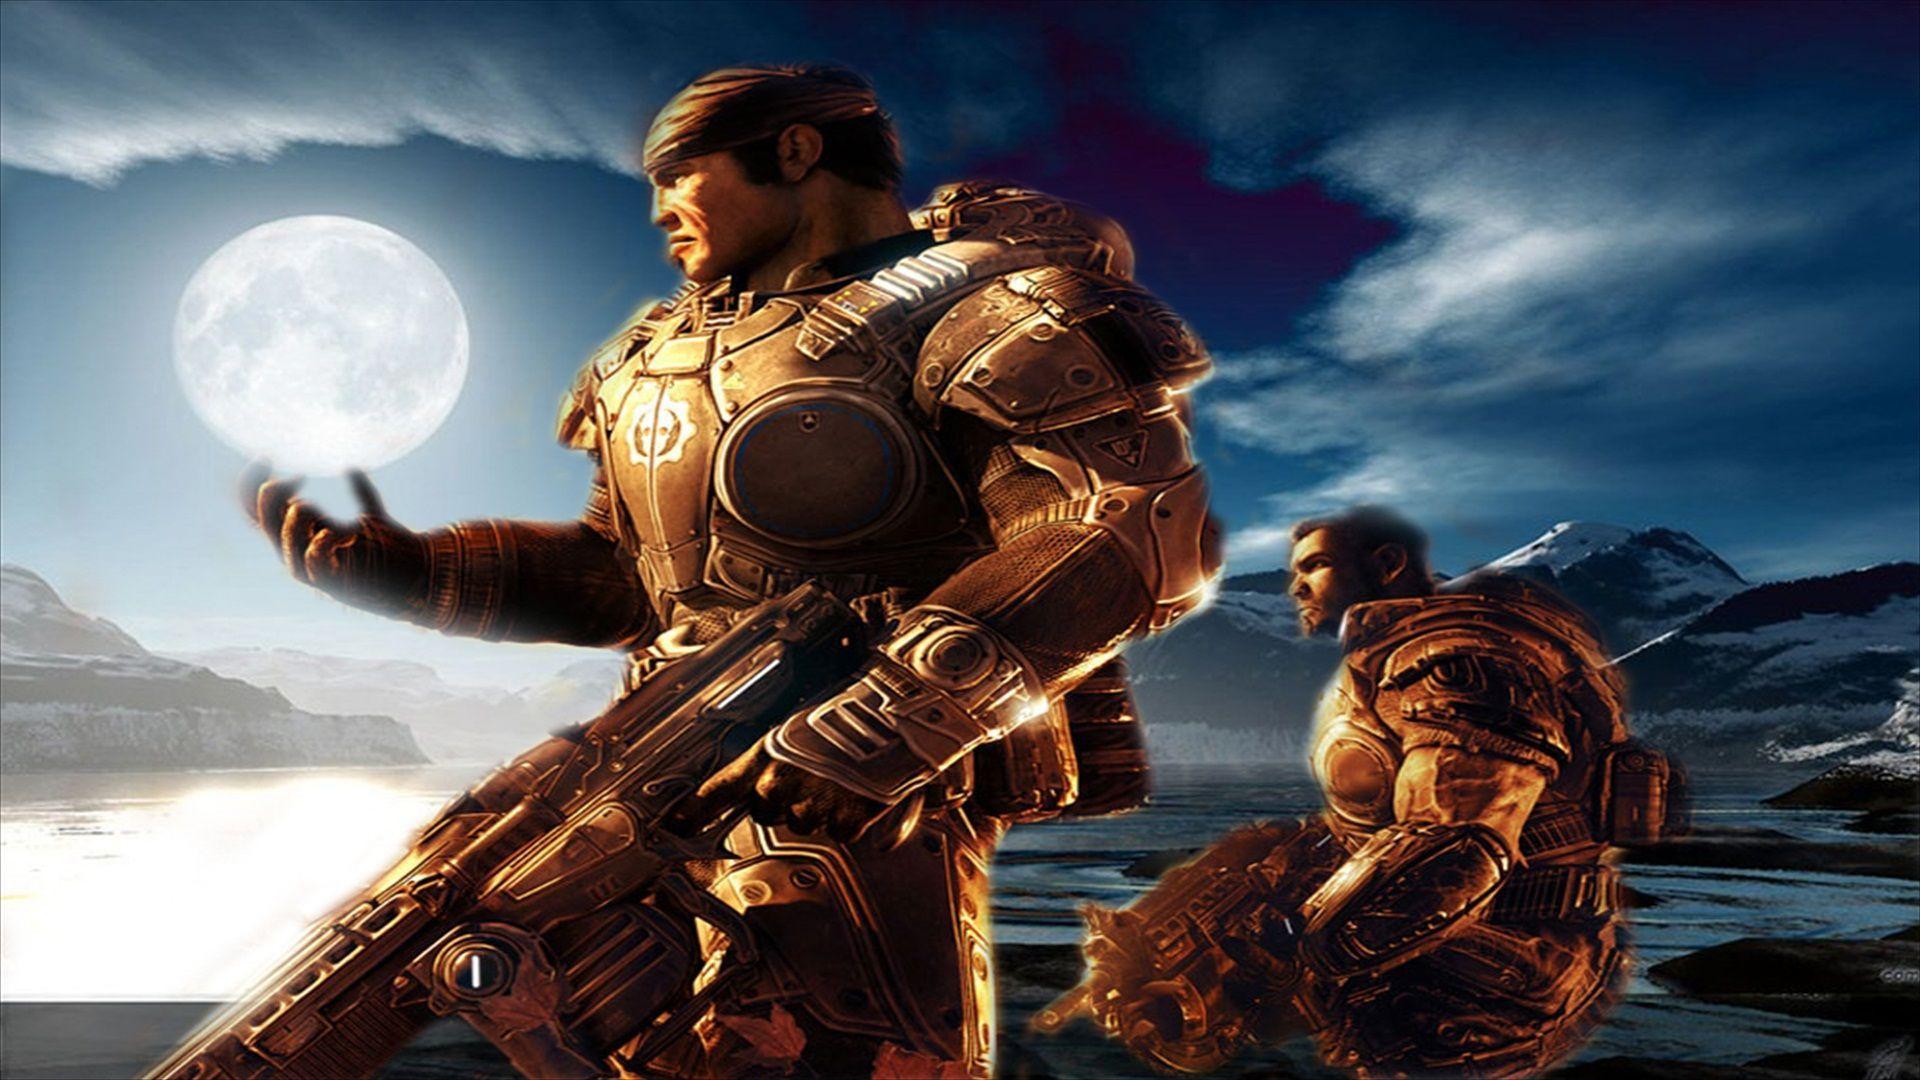 Marcus Fenix Wallpaper Or Image Color Palette Tags Gears Of War Marcus